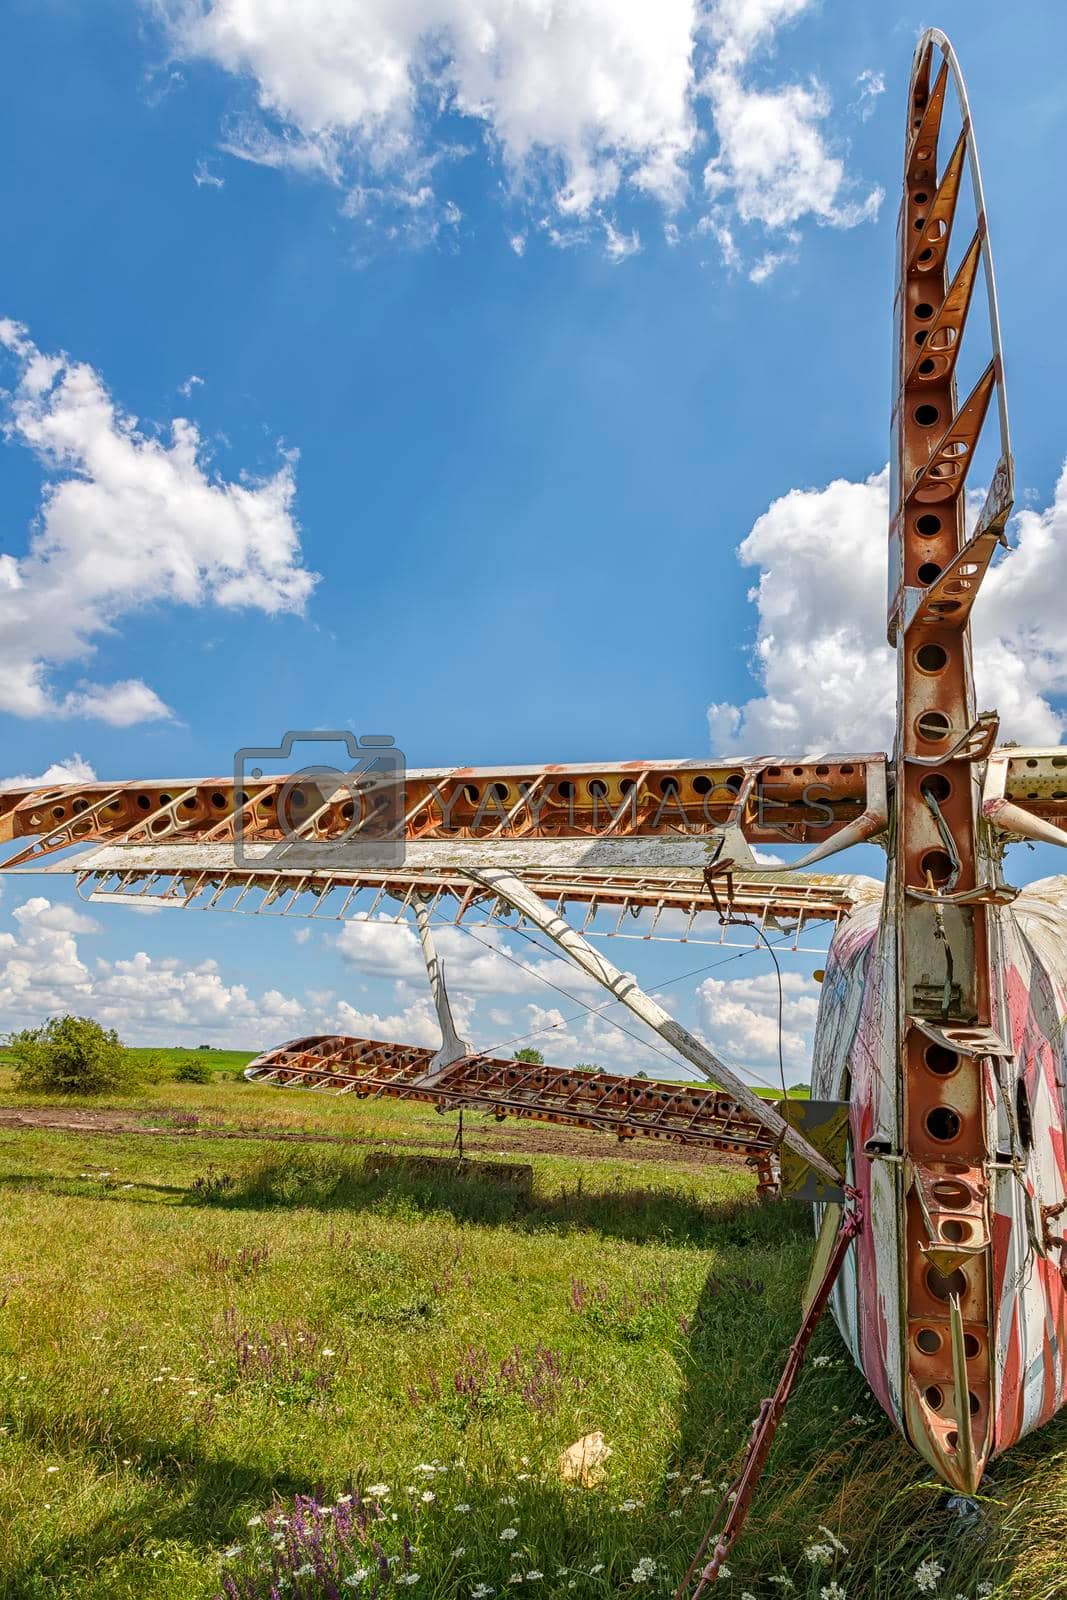 a part of abandoned aircraft plane standing in the field against the cloudy blue sky.